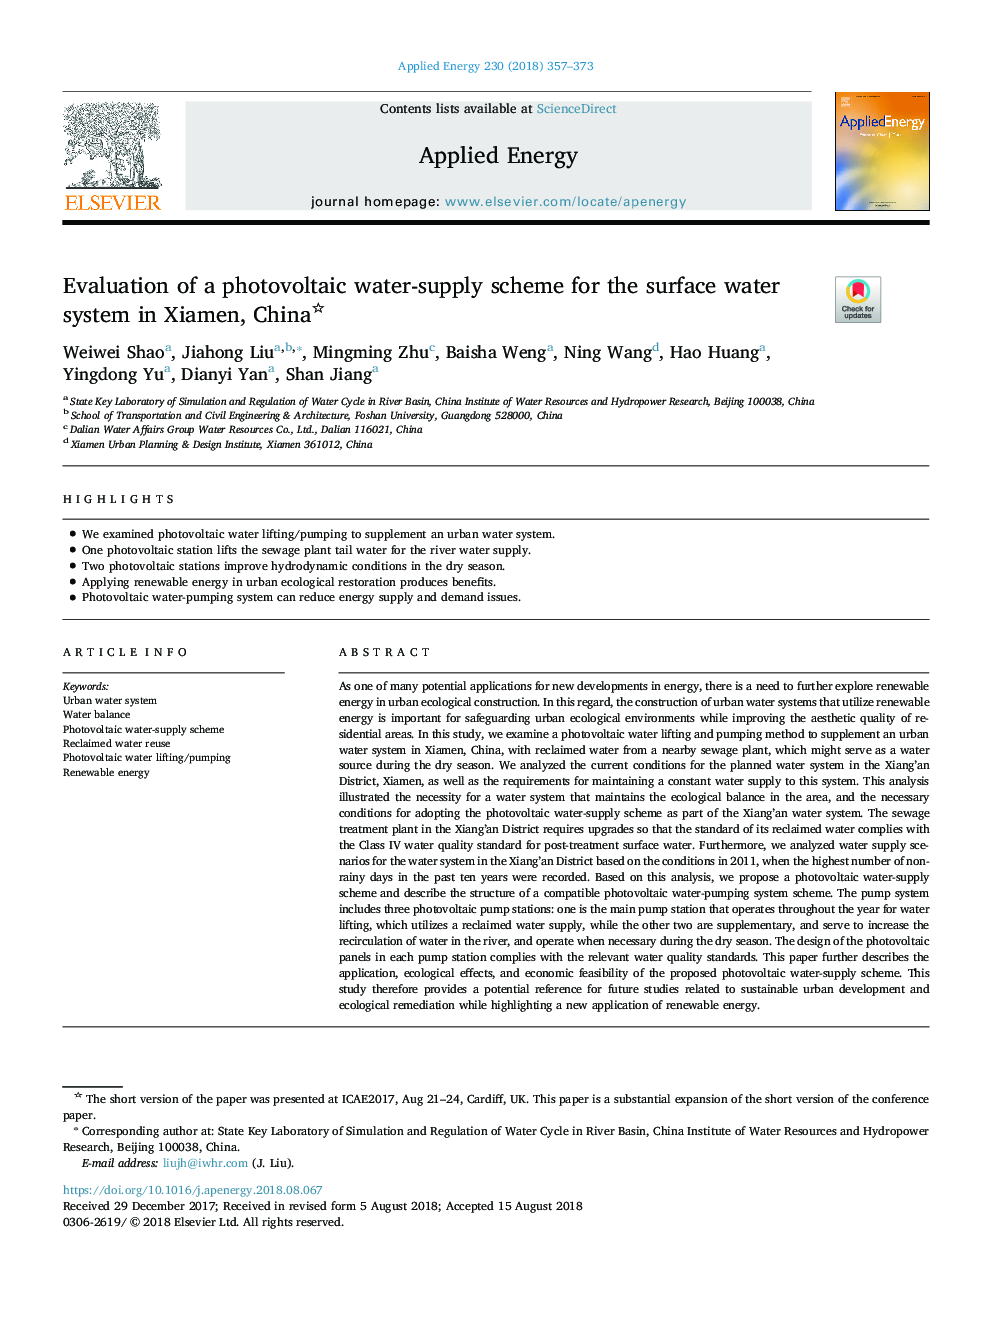 Evaluation of a photovoltaic water-supply scheme for the surface water system in Xiamen, China